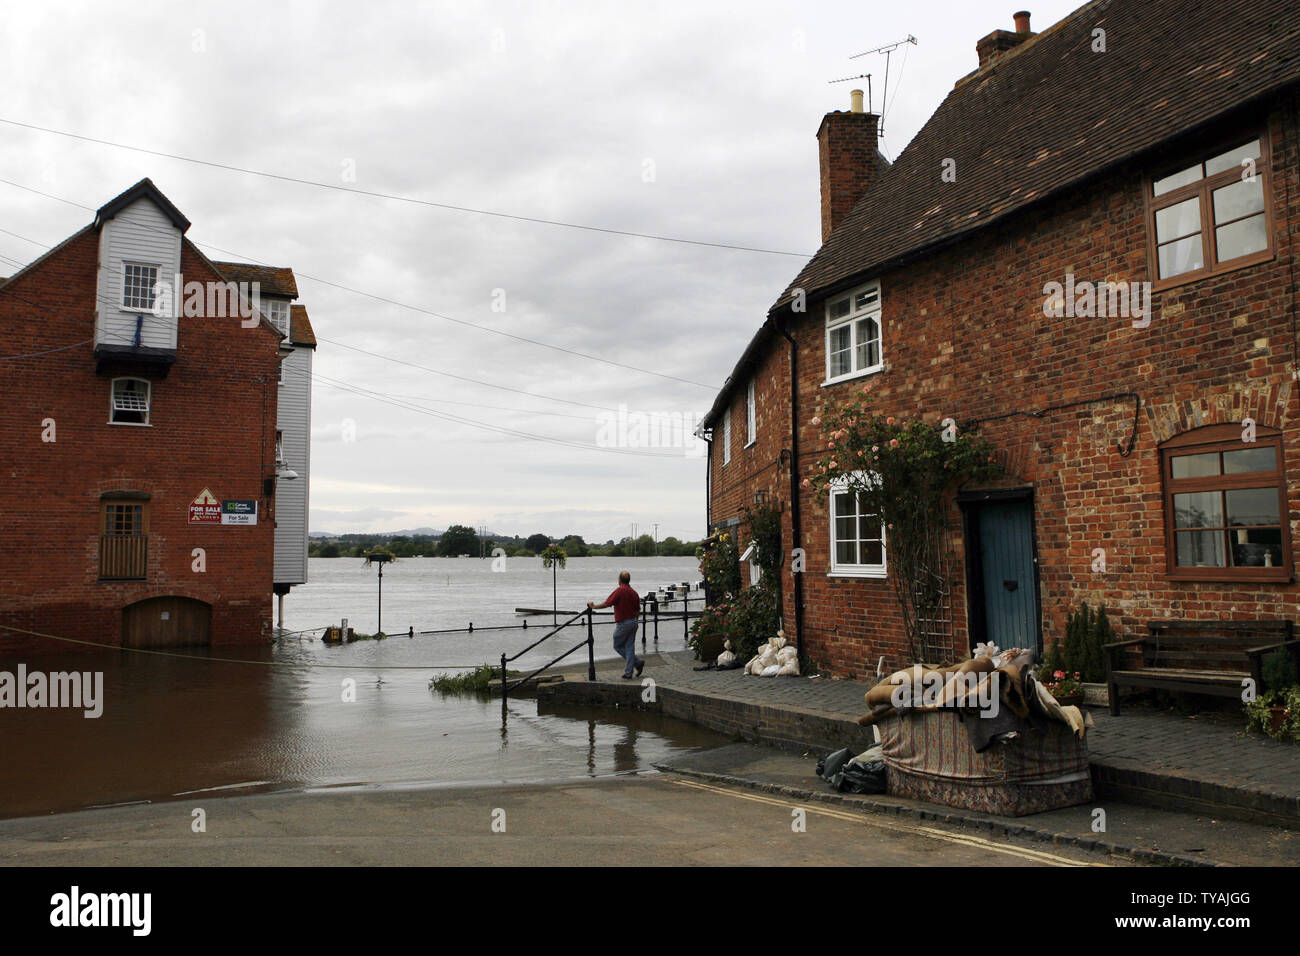 A resident of the village of Tewkesbury in Gloucester looks into the fields that are underwater after recent heavy flooding in England on July 25, 2007. The village is getting slowly back to normal as the water recedes, but residents are expected to have no fresh drinking waters for up to two weeks. (UPI Photo/Hugo Philpott) Stock Photo